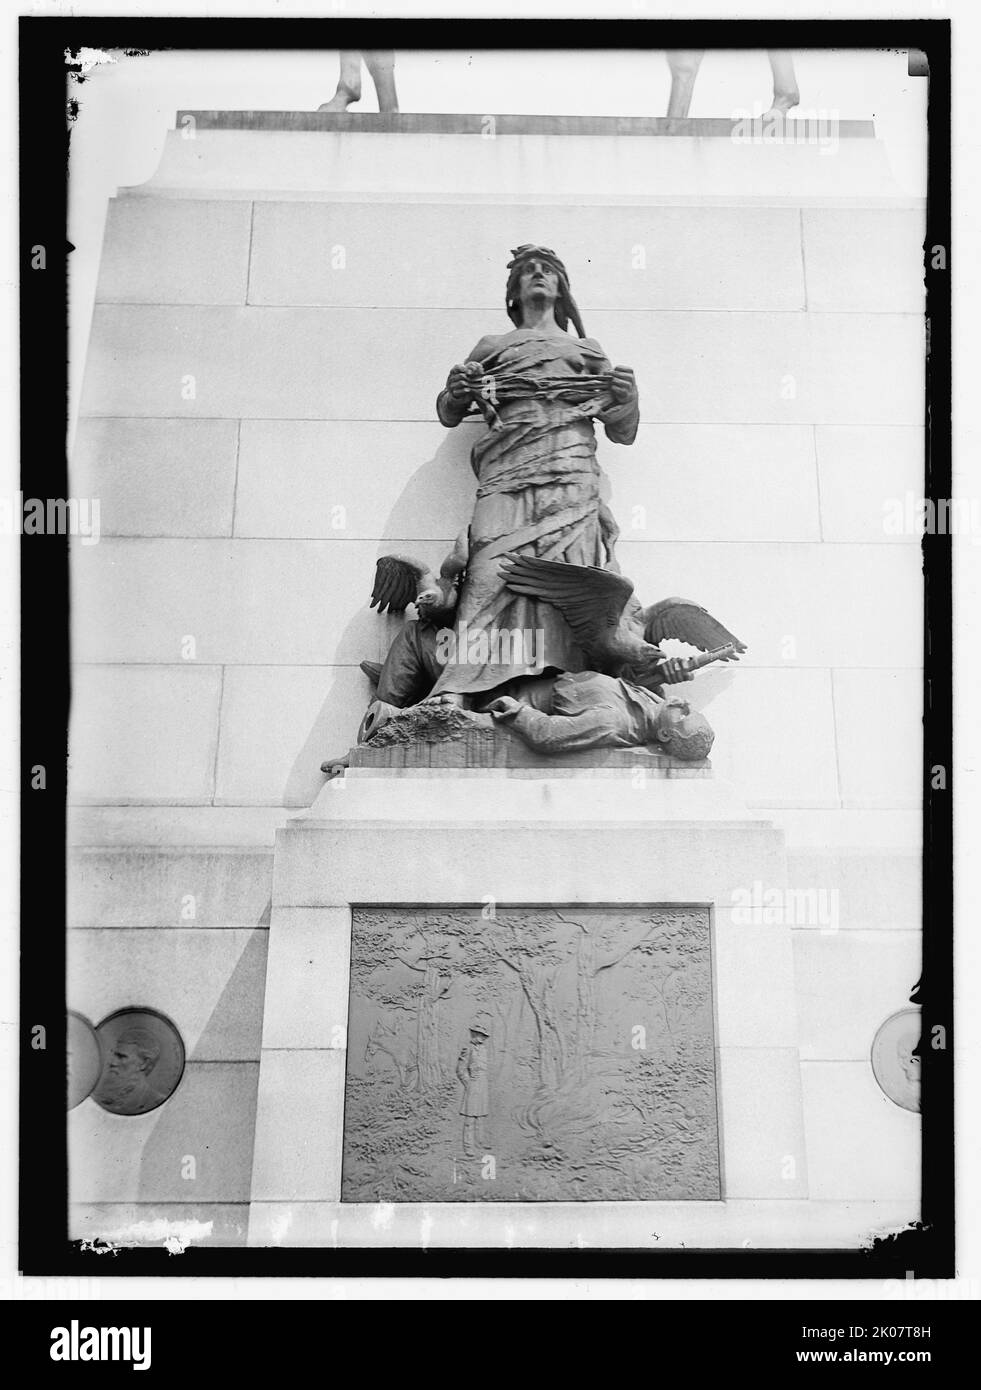 General William Tecumseh Sherman Monument, Washington, D.C., between 1913 and 1917. [Detail of the base of an equestrian statue of American Civil War Major General William Tecumseh Sherman. '&quot;War&quot;, on the west side, is a horrible fury, seething with rage and hatred, who tramples humanity in the form of a dead young soldier at her feet. Large bronze vultures perch on the body about to feast on its flesh, graphically driving home Sherman's famous observation that &quot;war is hell&quot;.']. Stock Photo